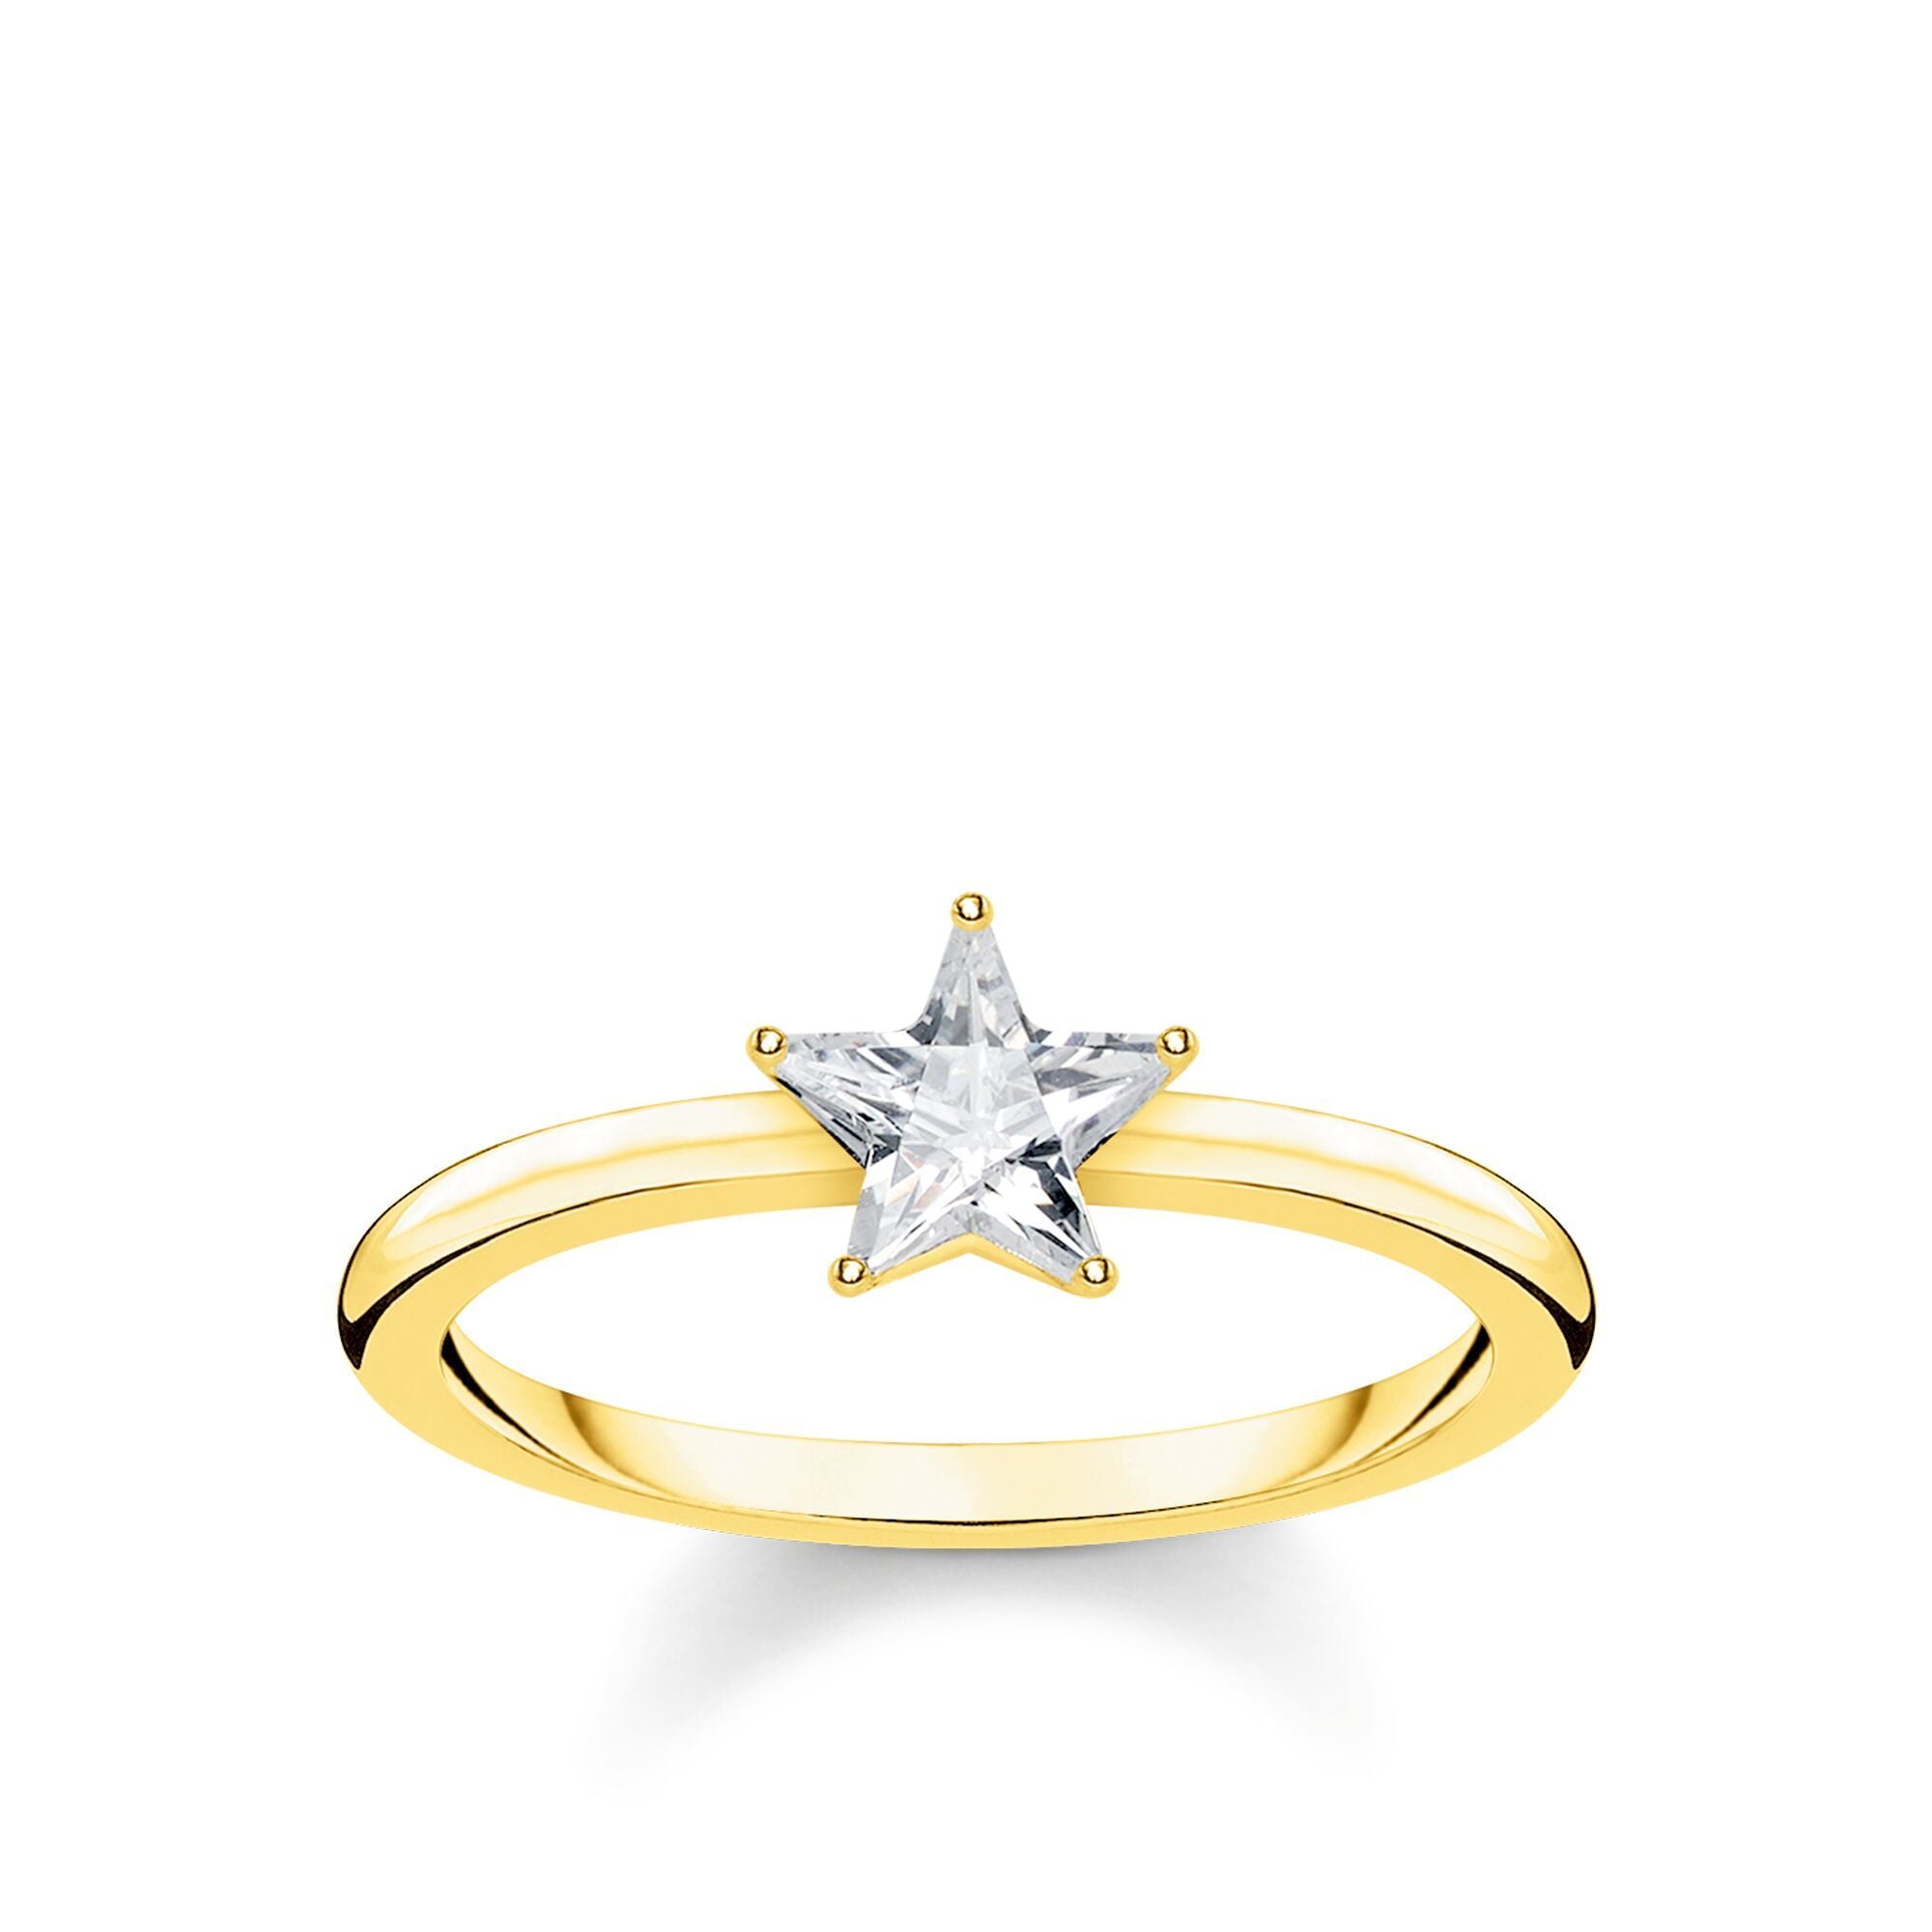 Thomas Sabo Glam & Soul Yellow Gold Plated Sterling Silver CZ Magic Stars Ring D